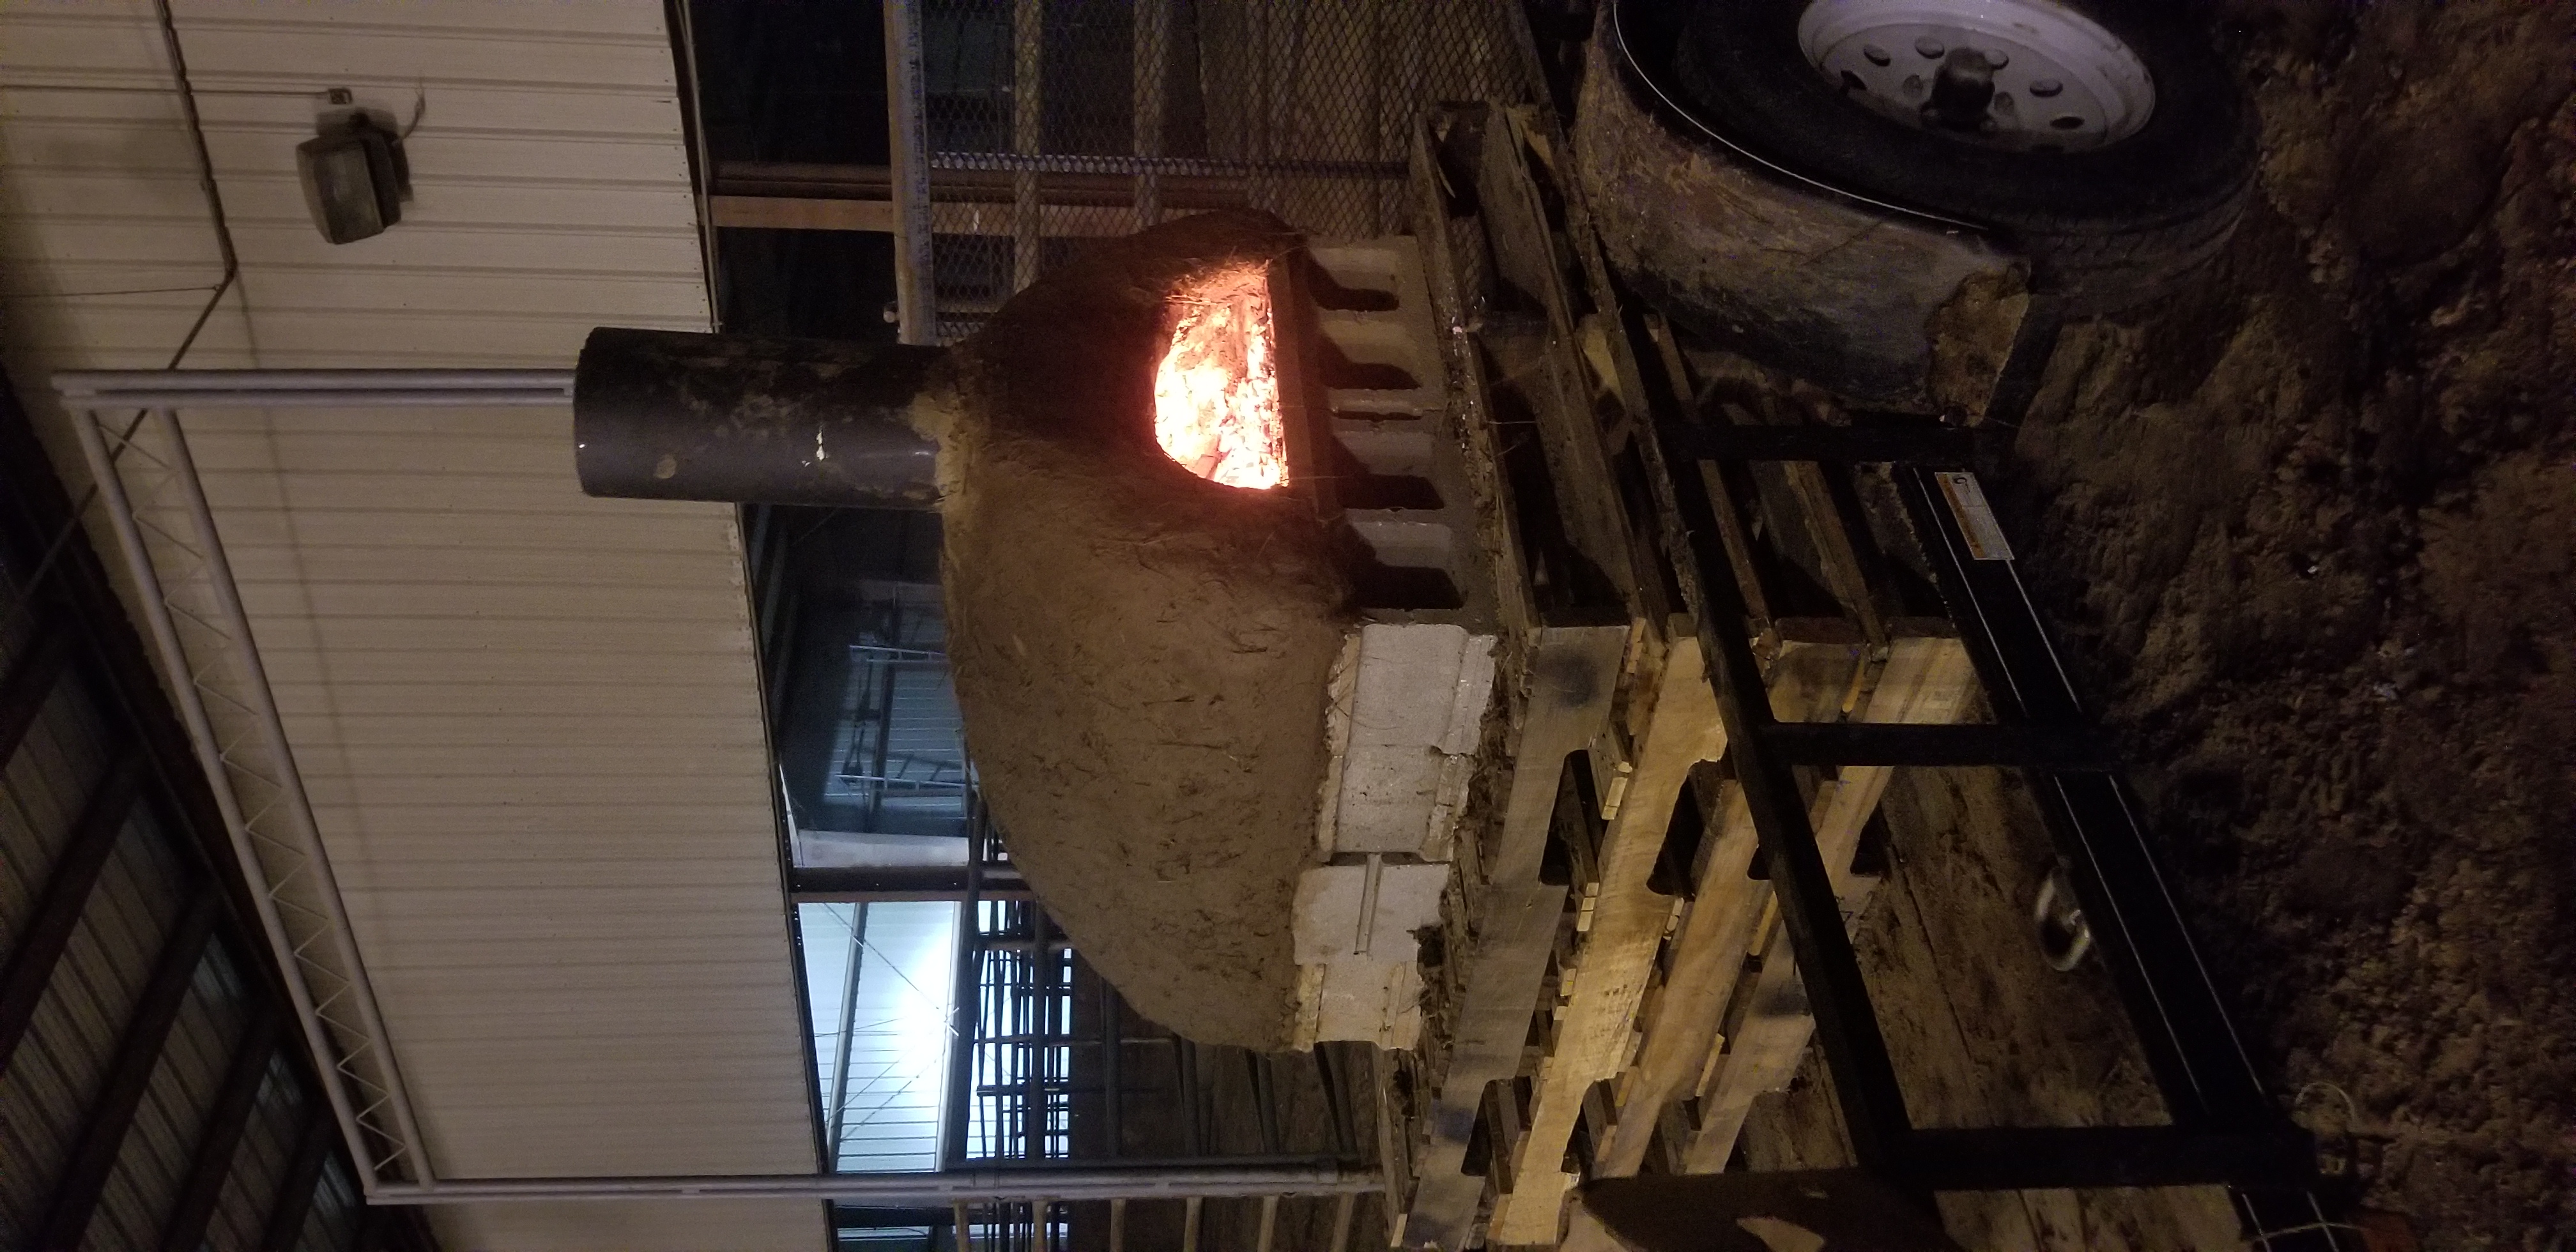 Firing a full sized cob oven made at the fair